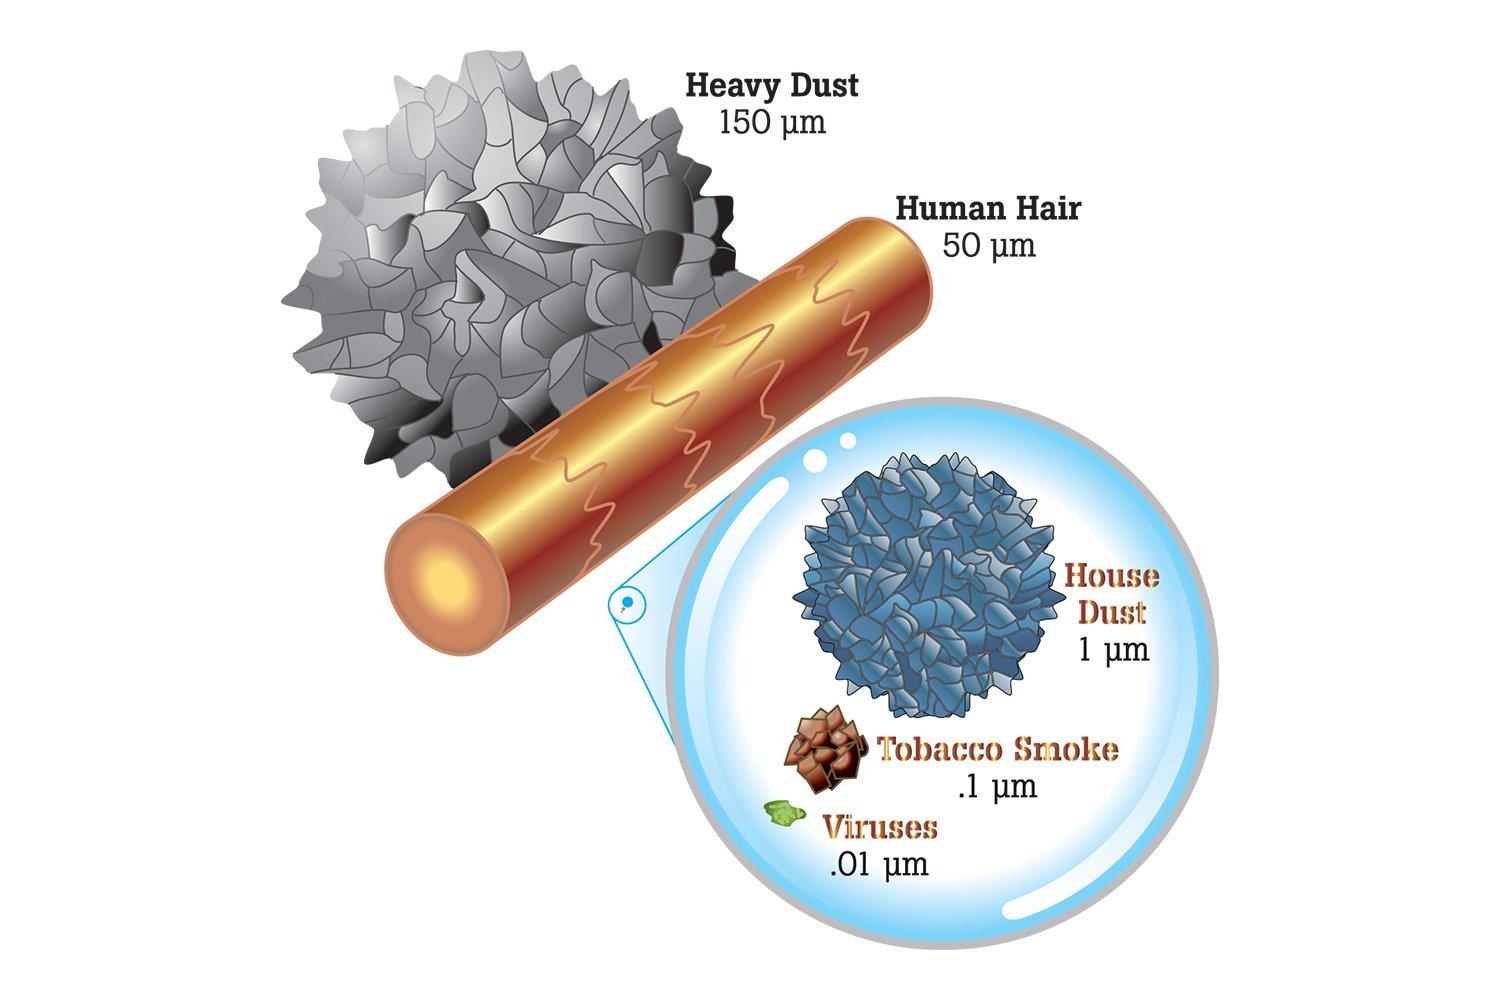 Comparing particulate sizes of human hair and viruses